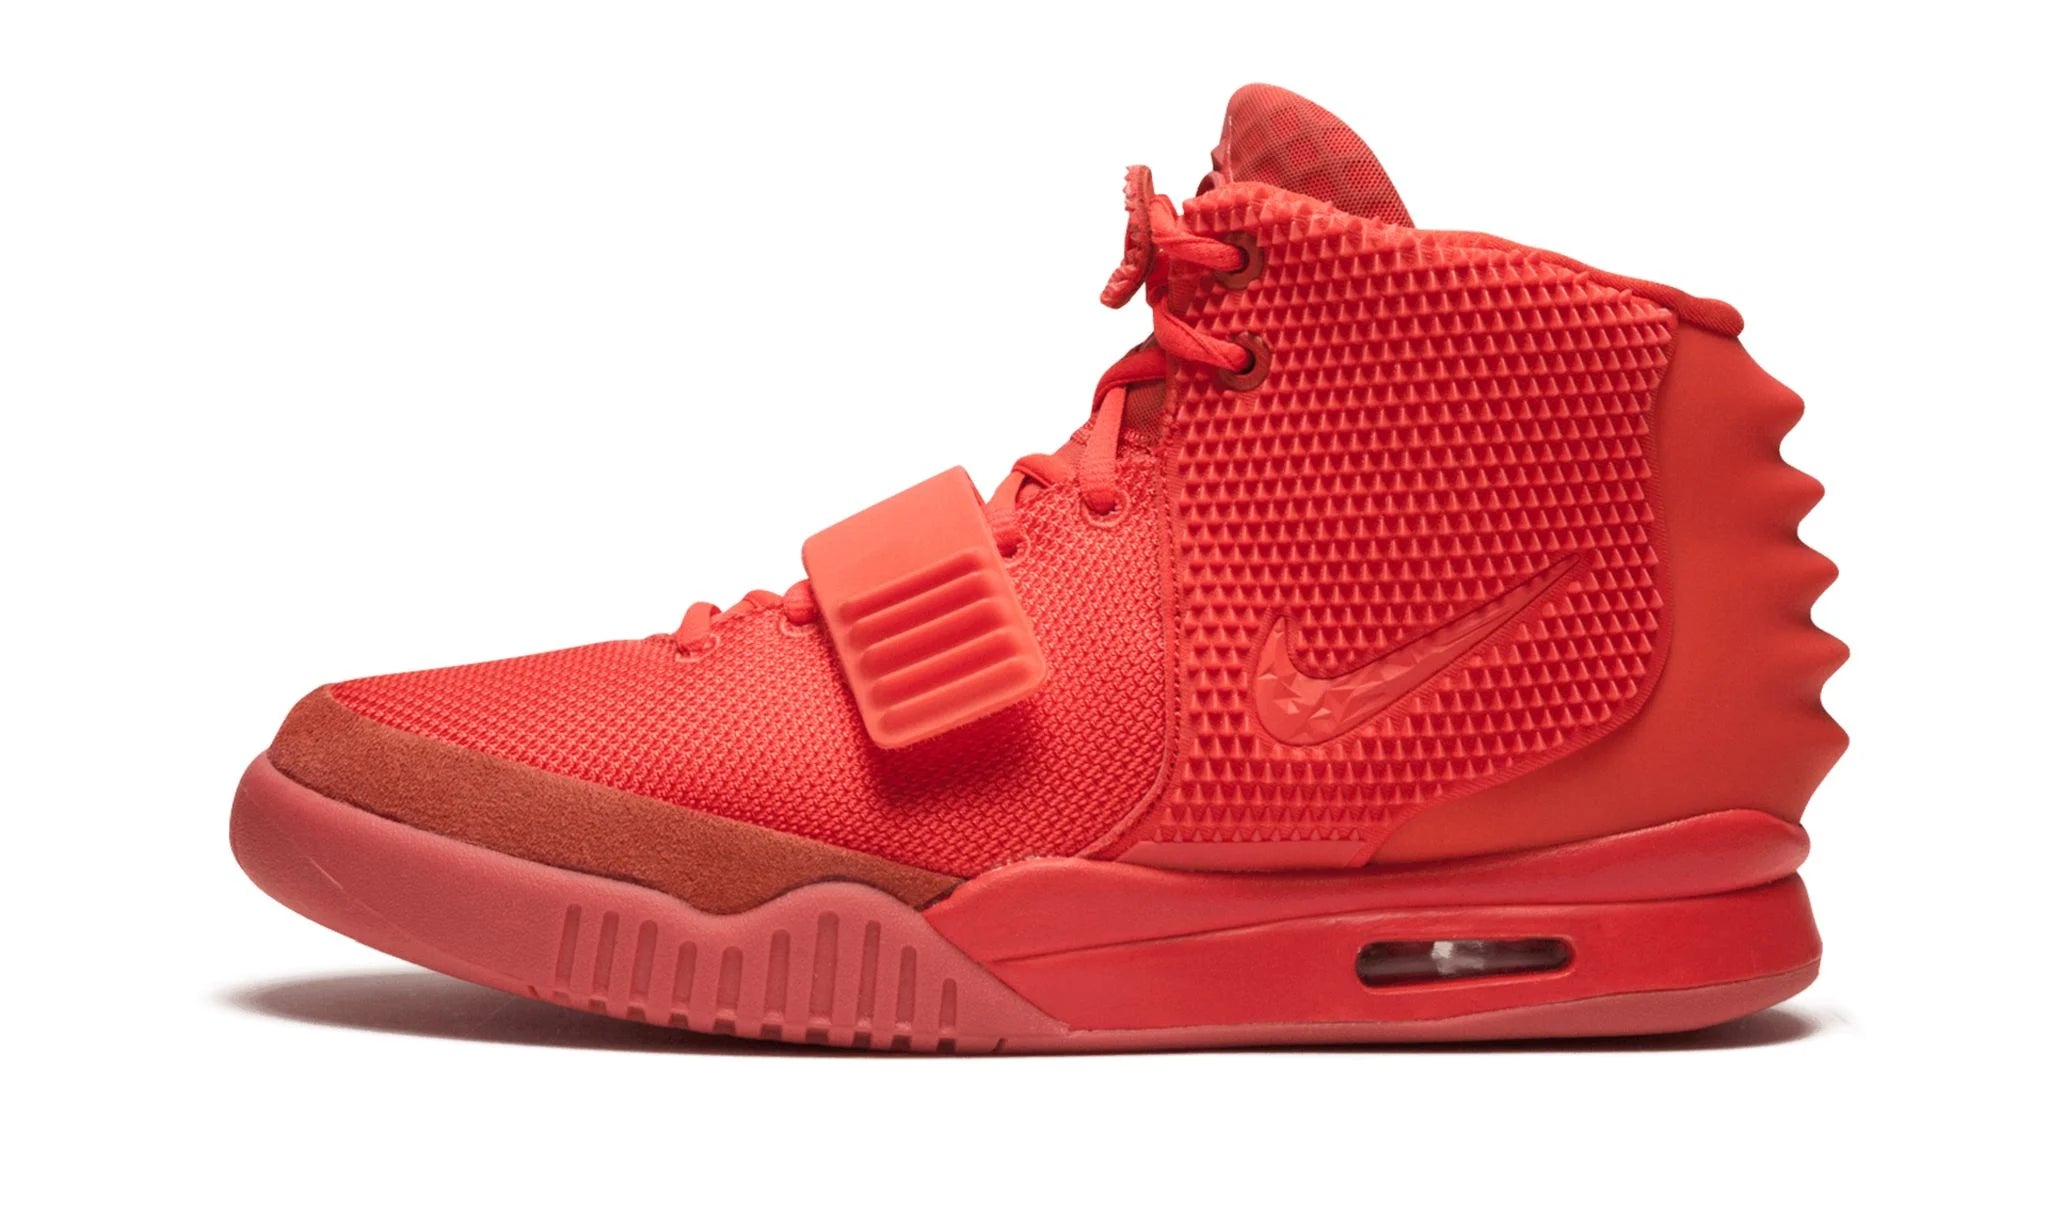 Nike Air Yeezy 2 SP "Red October"